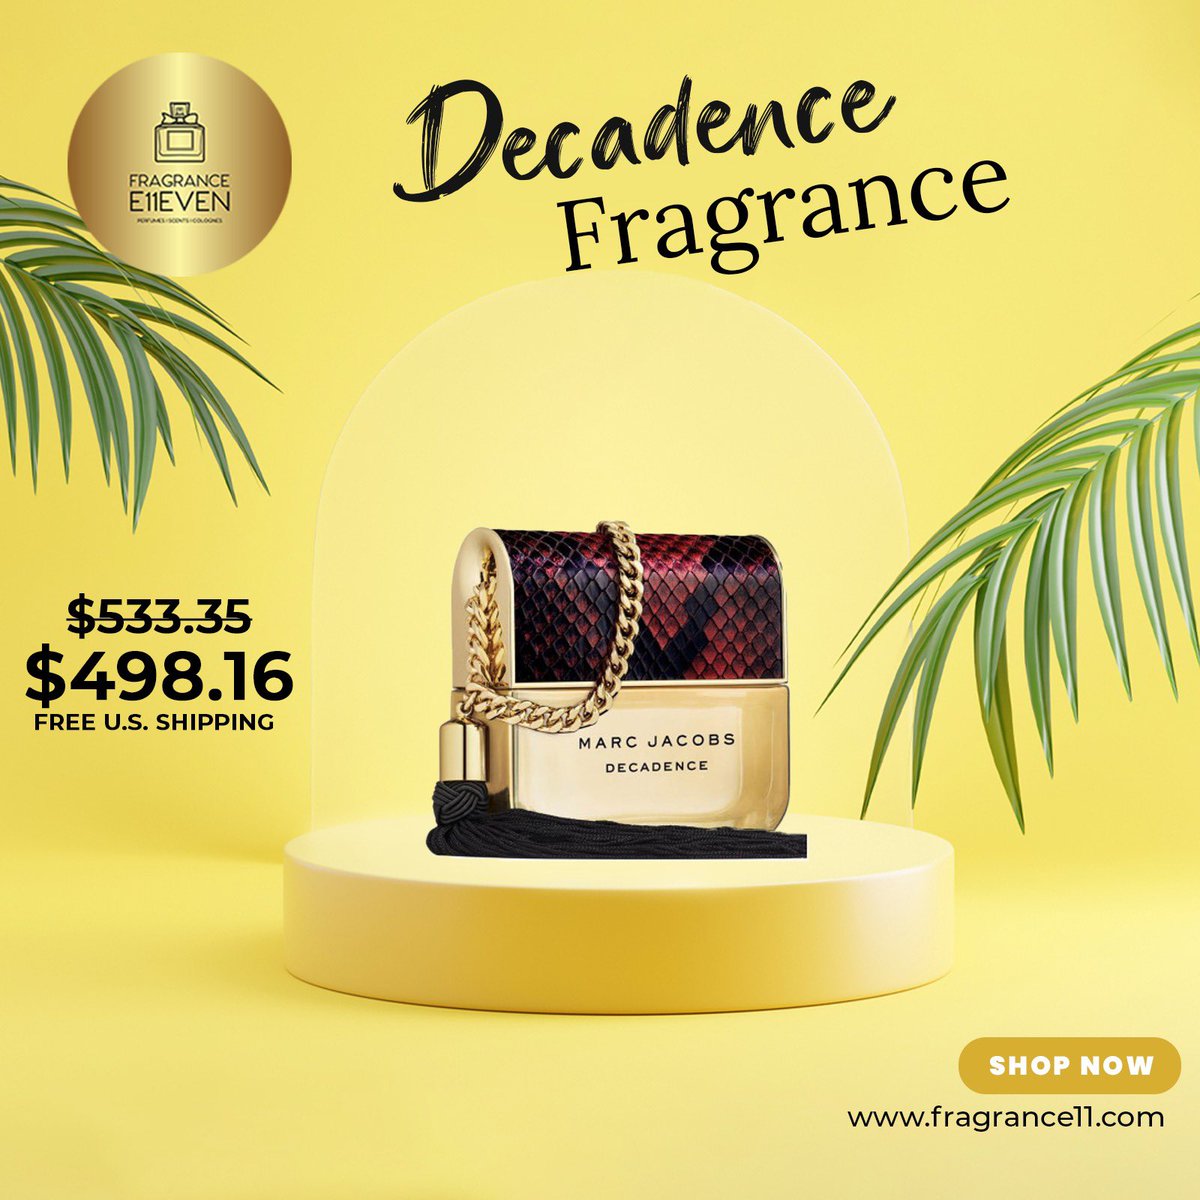 Decadence Rouge Noir Edition by Marc Jacobs is a Amber Floral fragrance for women. Decadence Rouge Noir Edition was launched in 2017.

#fragrance11 #fragrance #fragrances #scentoftheday #fragrancelover #perfumeaddict #perfumelovers #perfumelover #scents #fragranceaddict